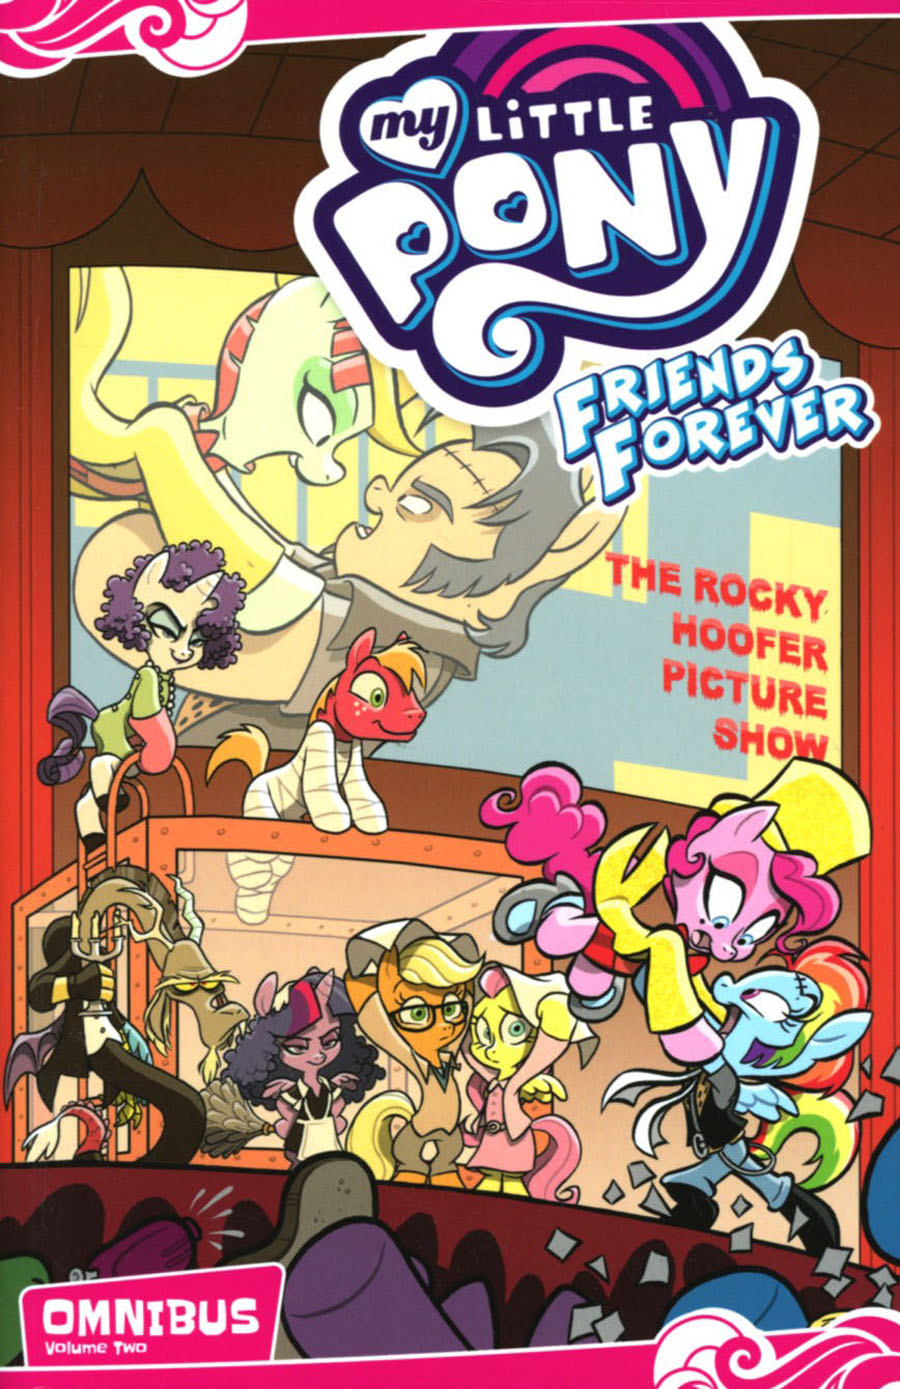 My Little Pony Friends Forever Omnibus Vol 2 TP